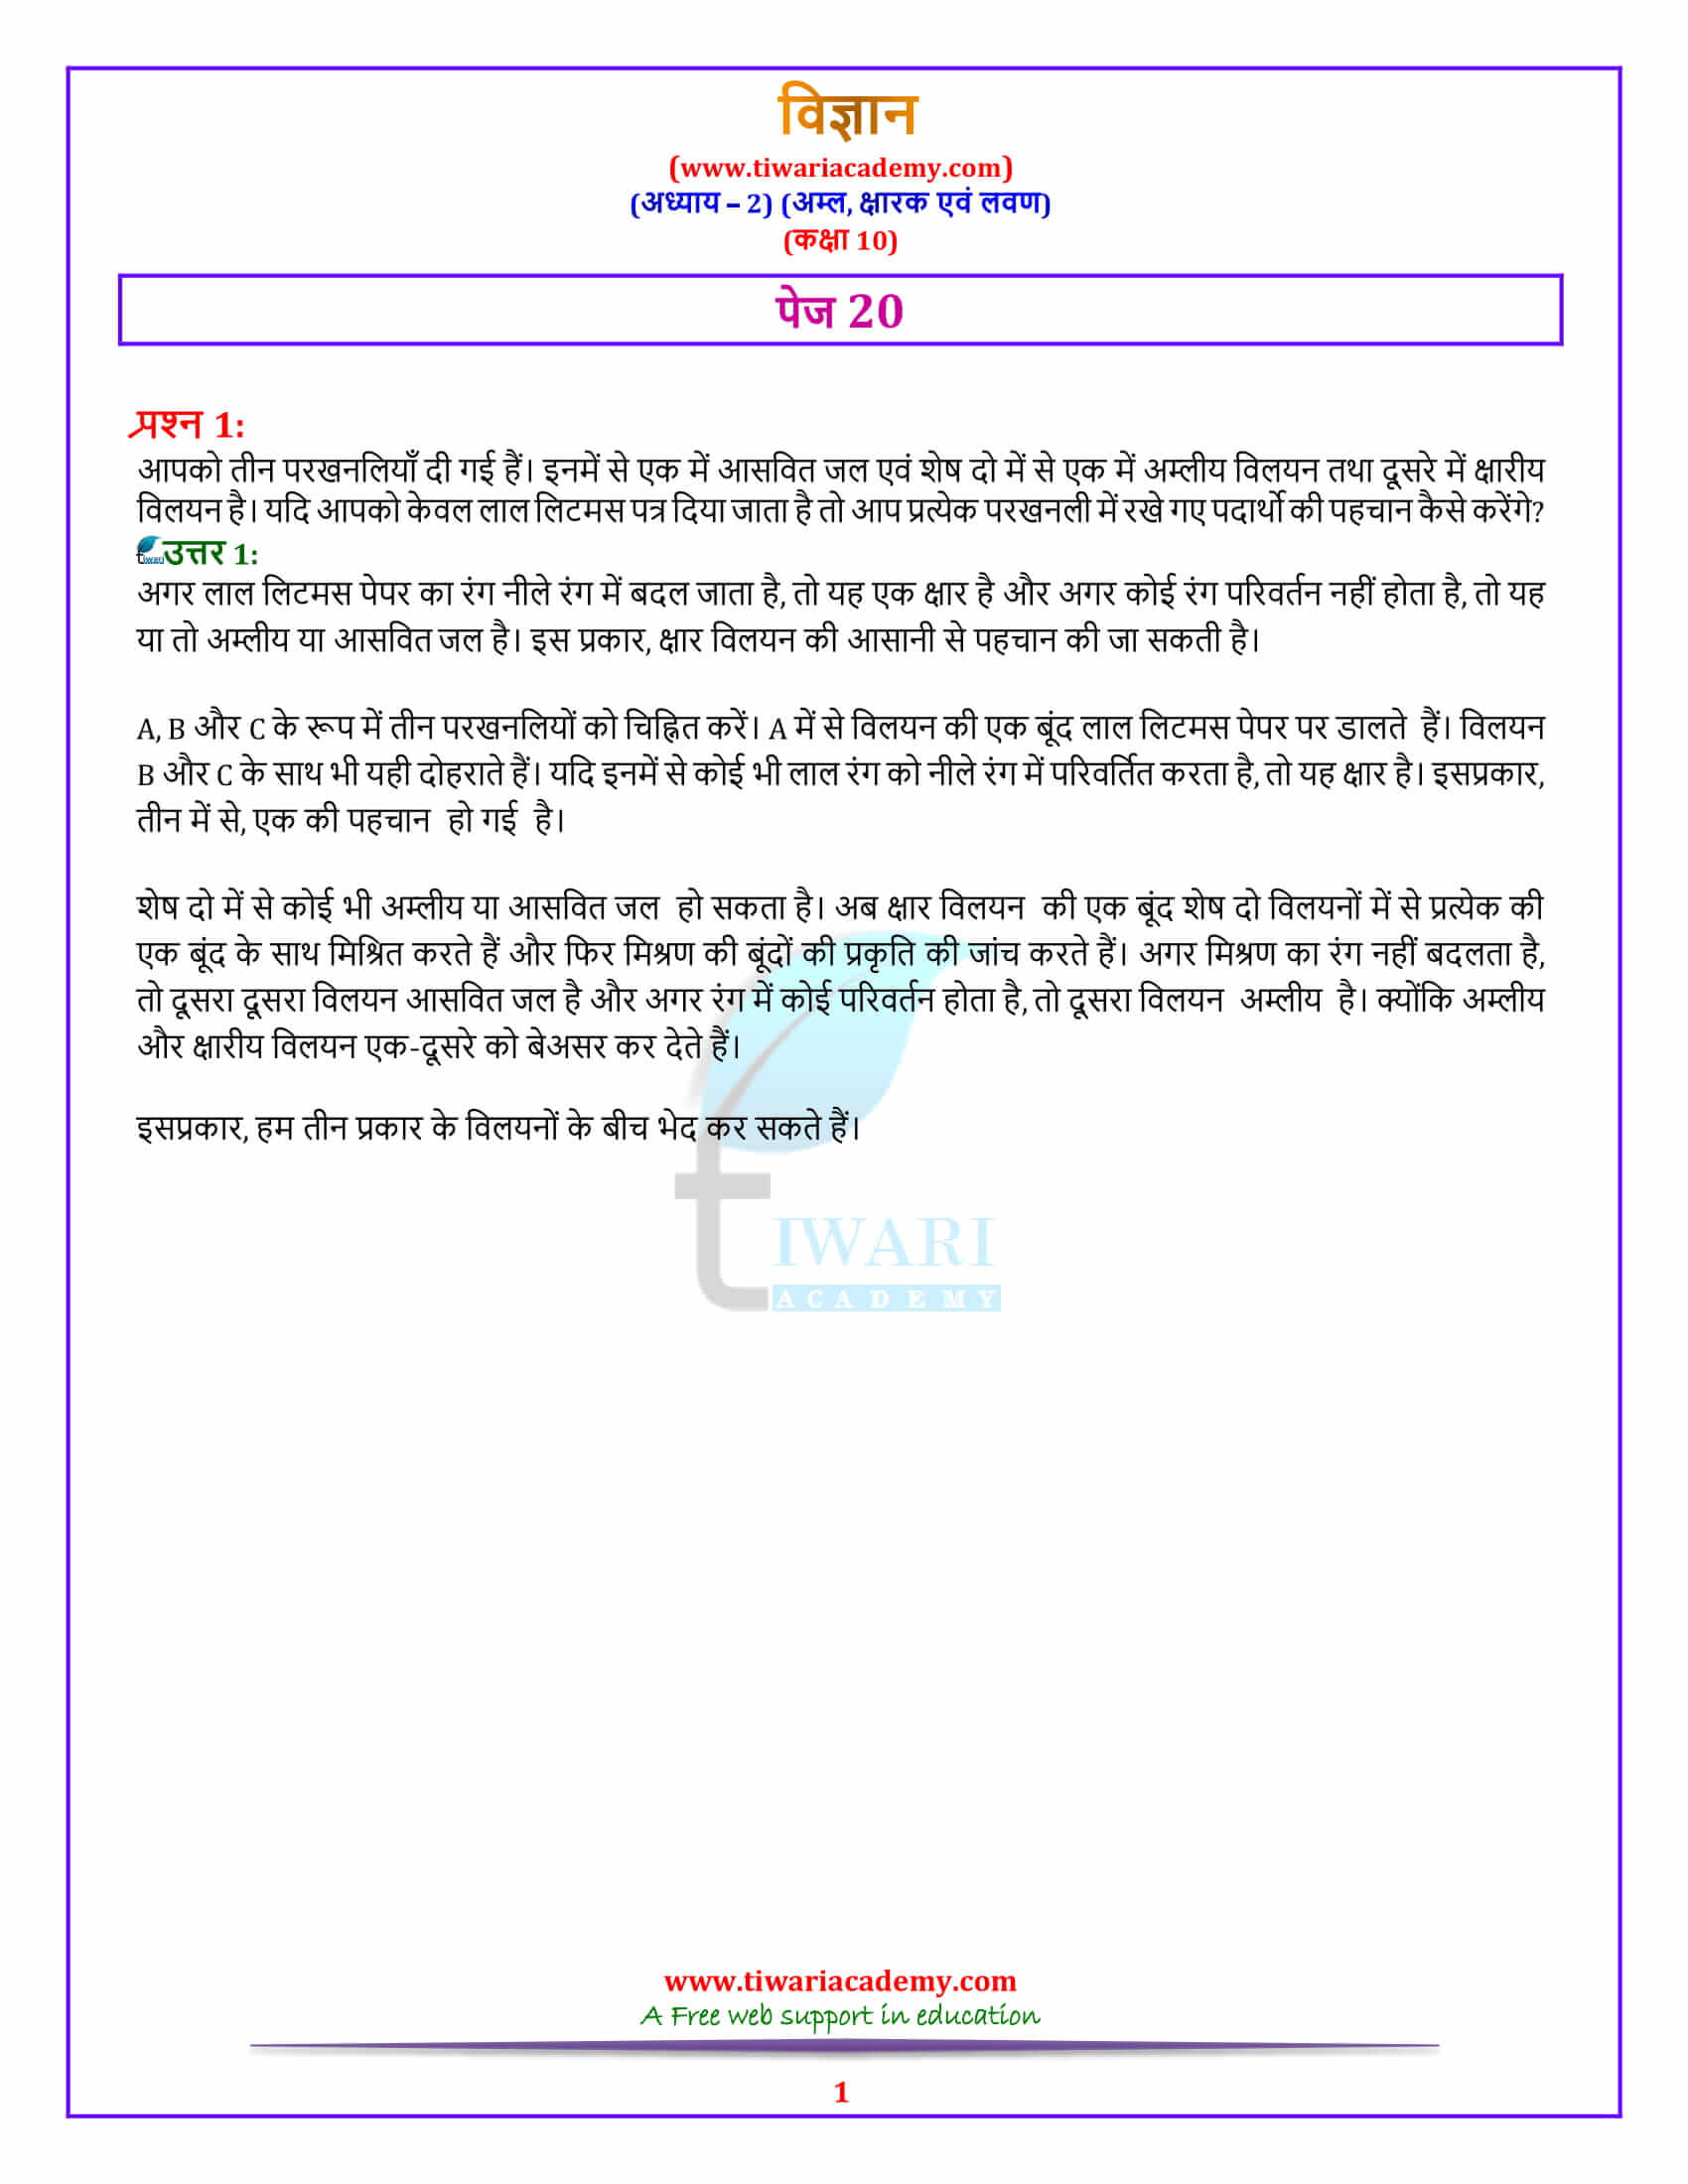 10 Science Chapter 2 Acids, Bases and Salts Intext questions पेज 20 के उत्तर